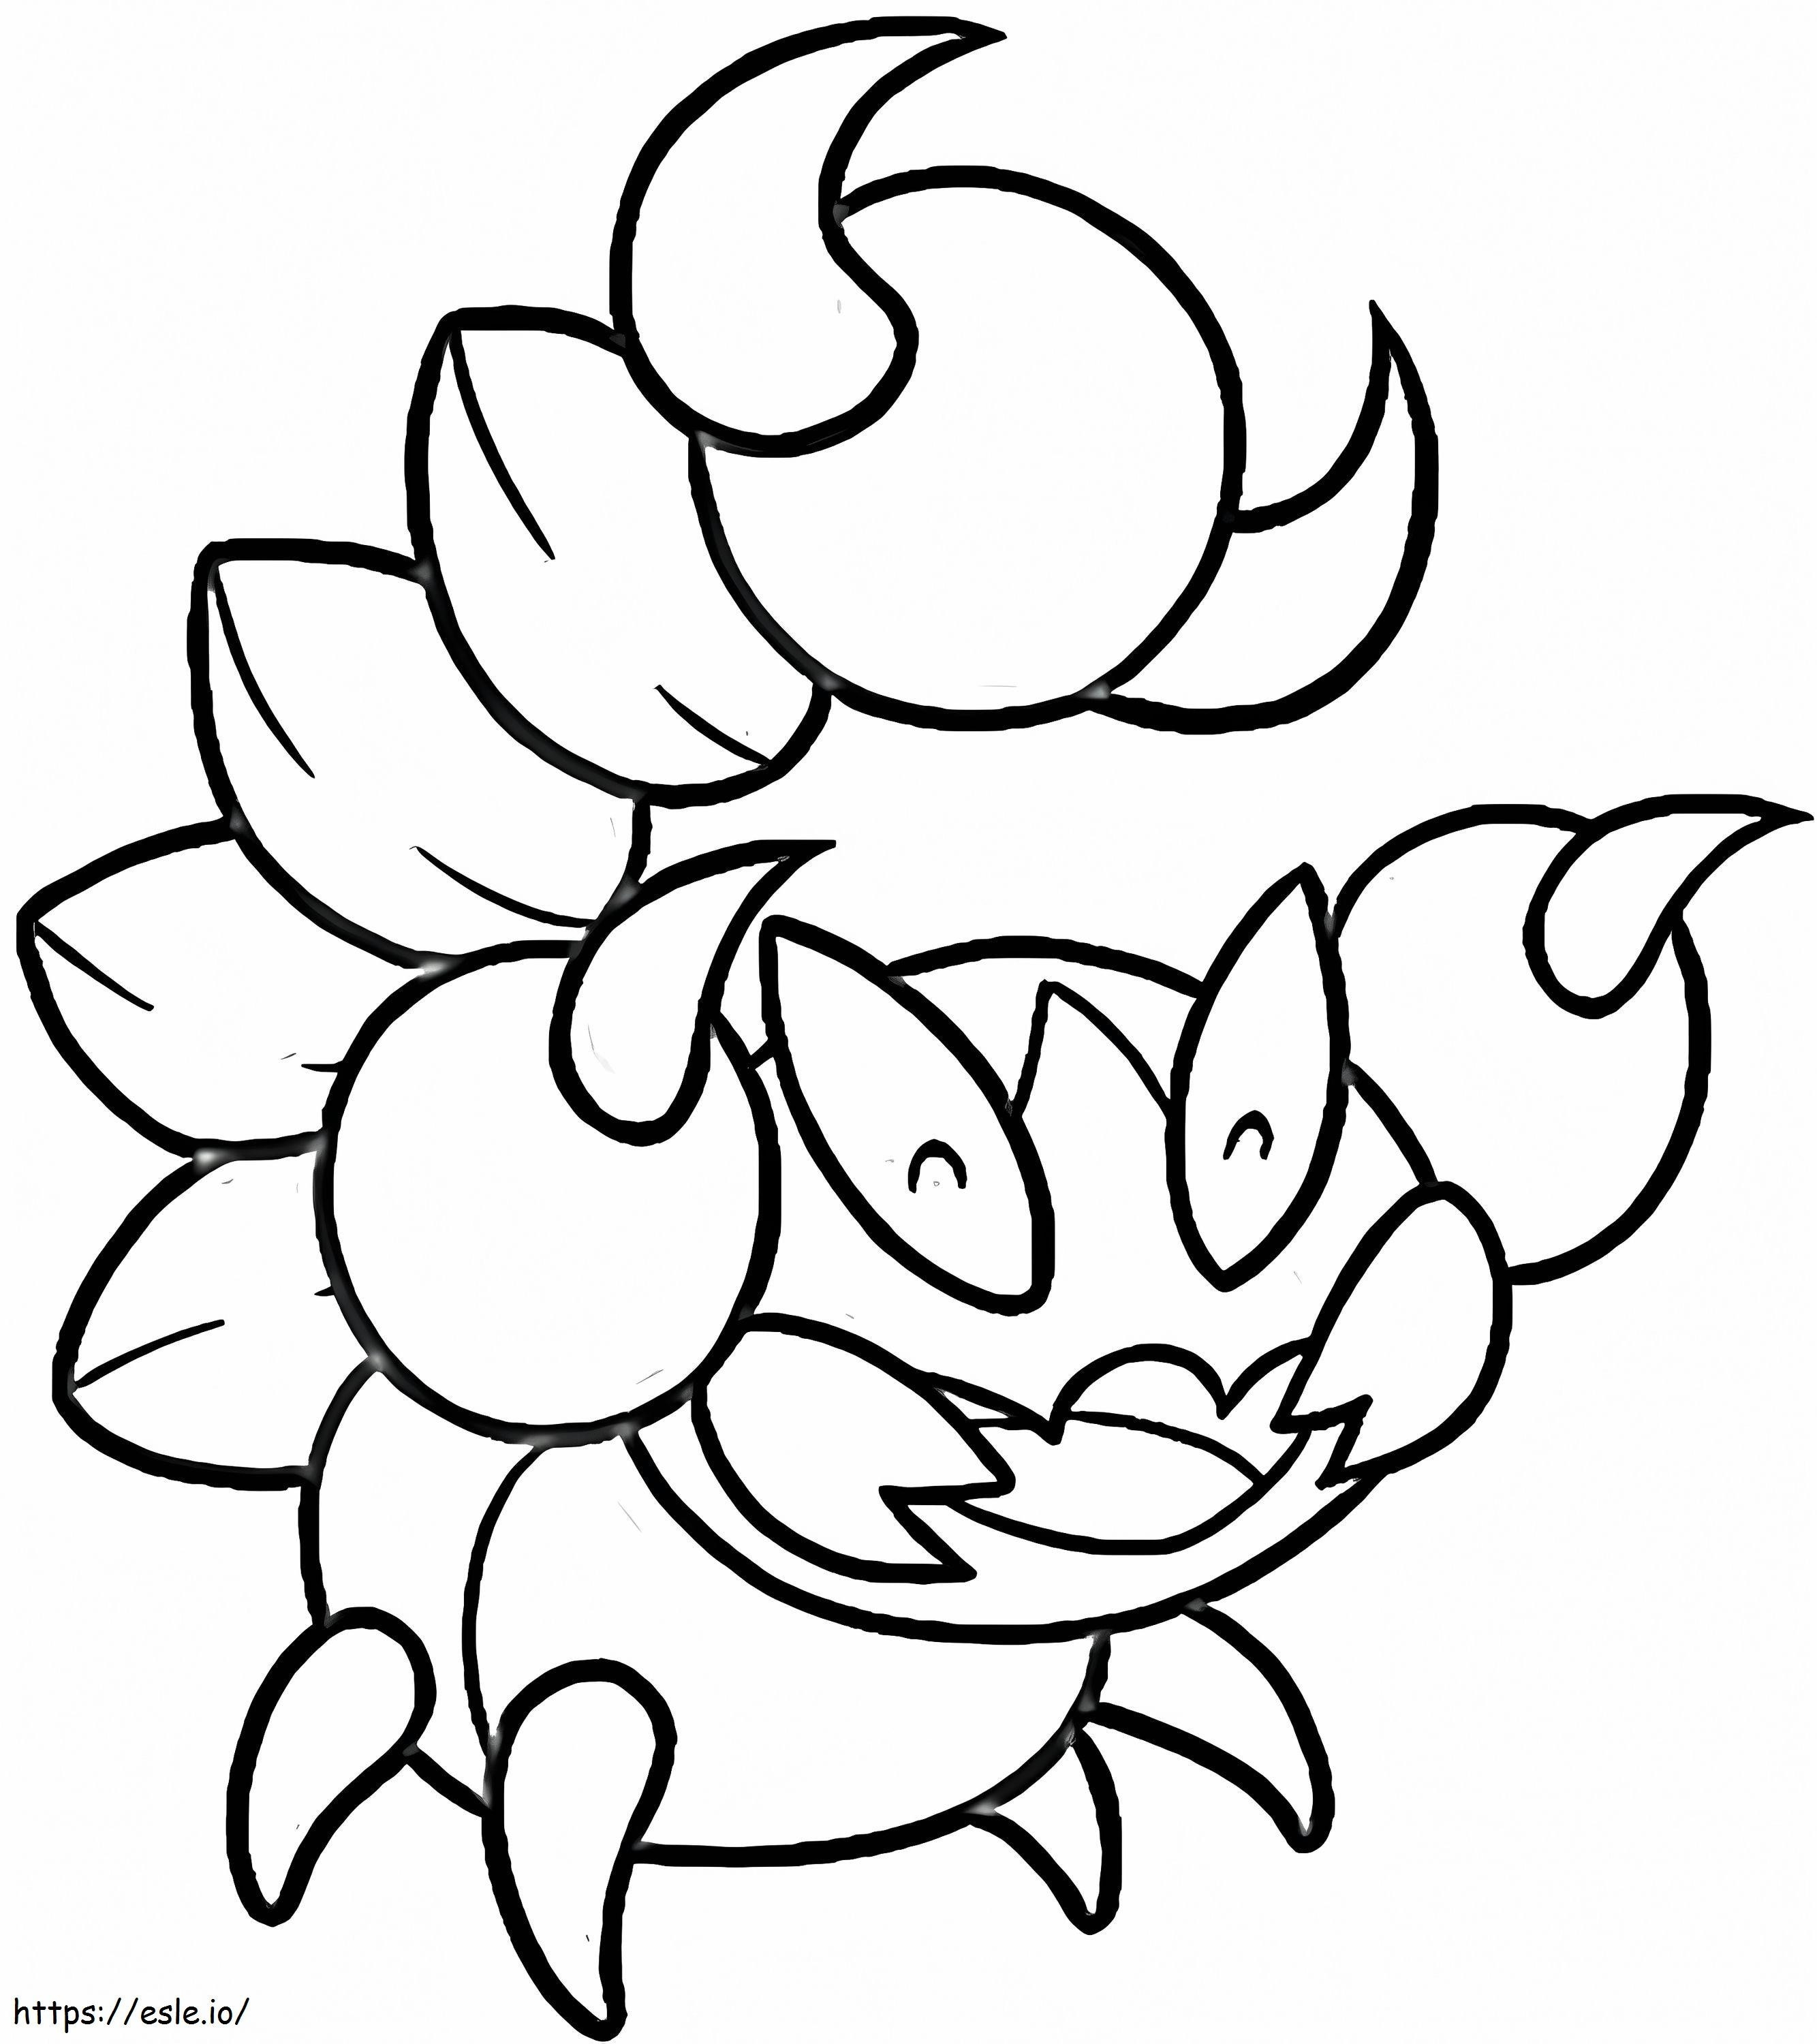 Shell Gen 4 Pokemon coloring page